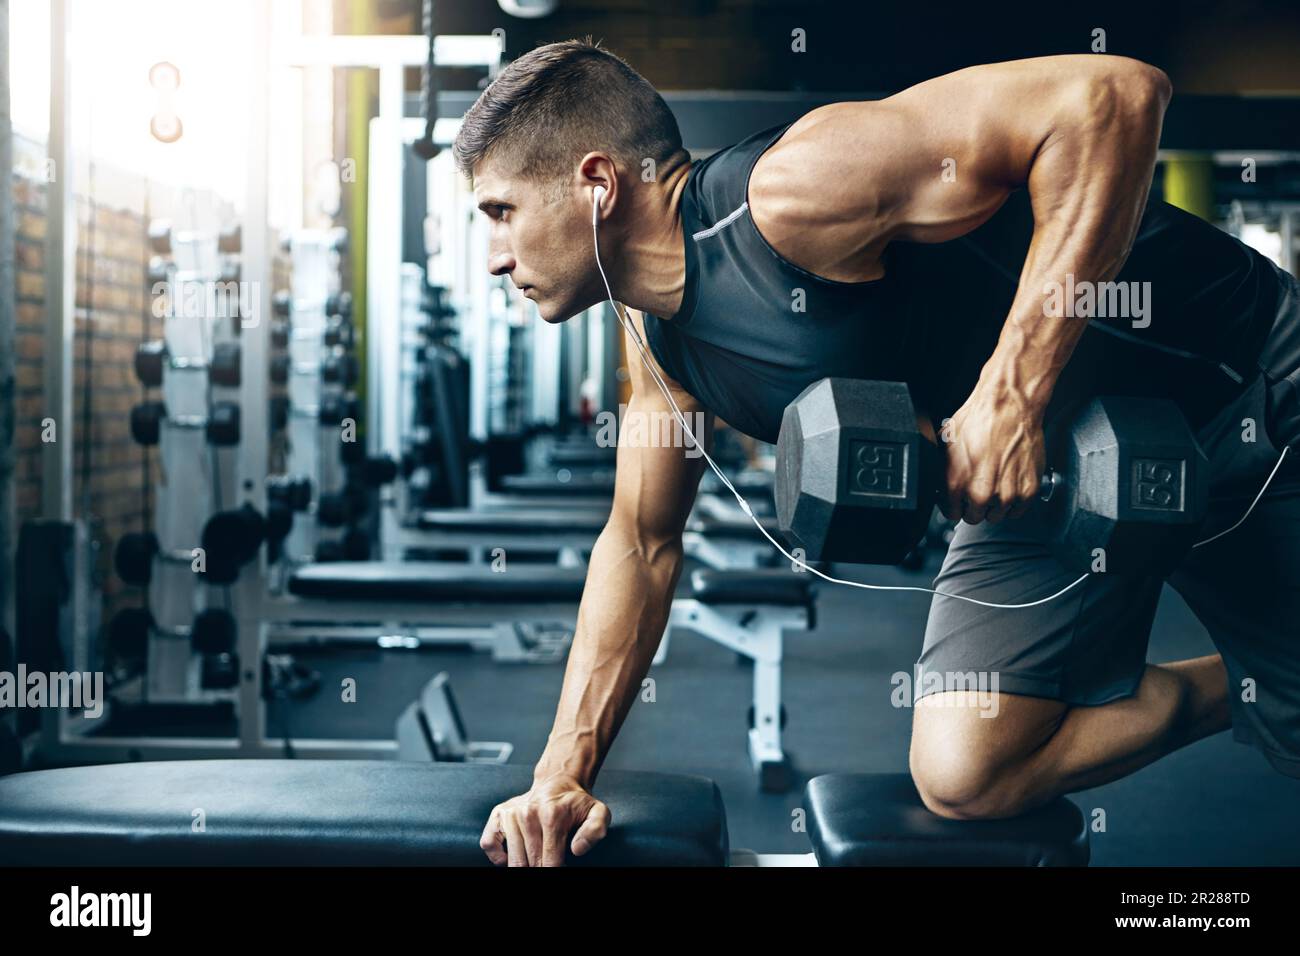 Difficult doesnt mean impossible. a man doing weight training at the gym. Stock Photo